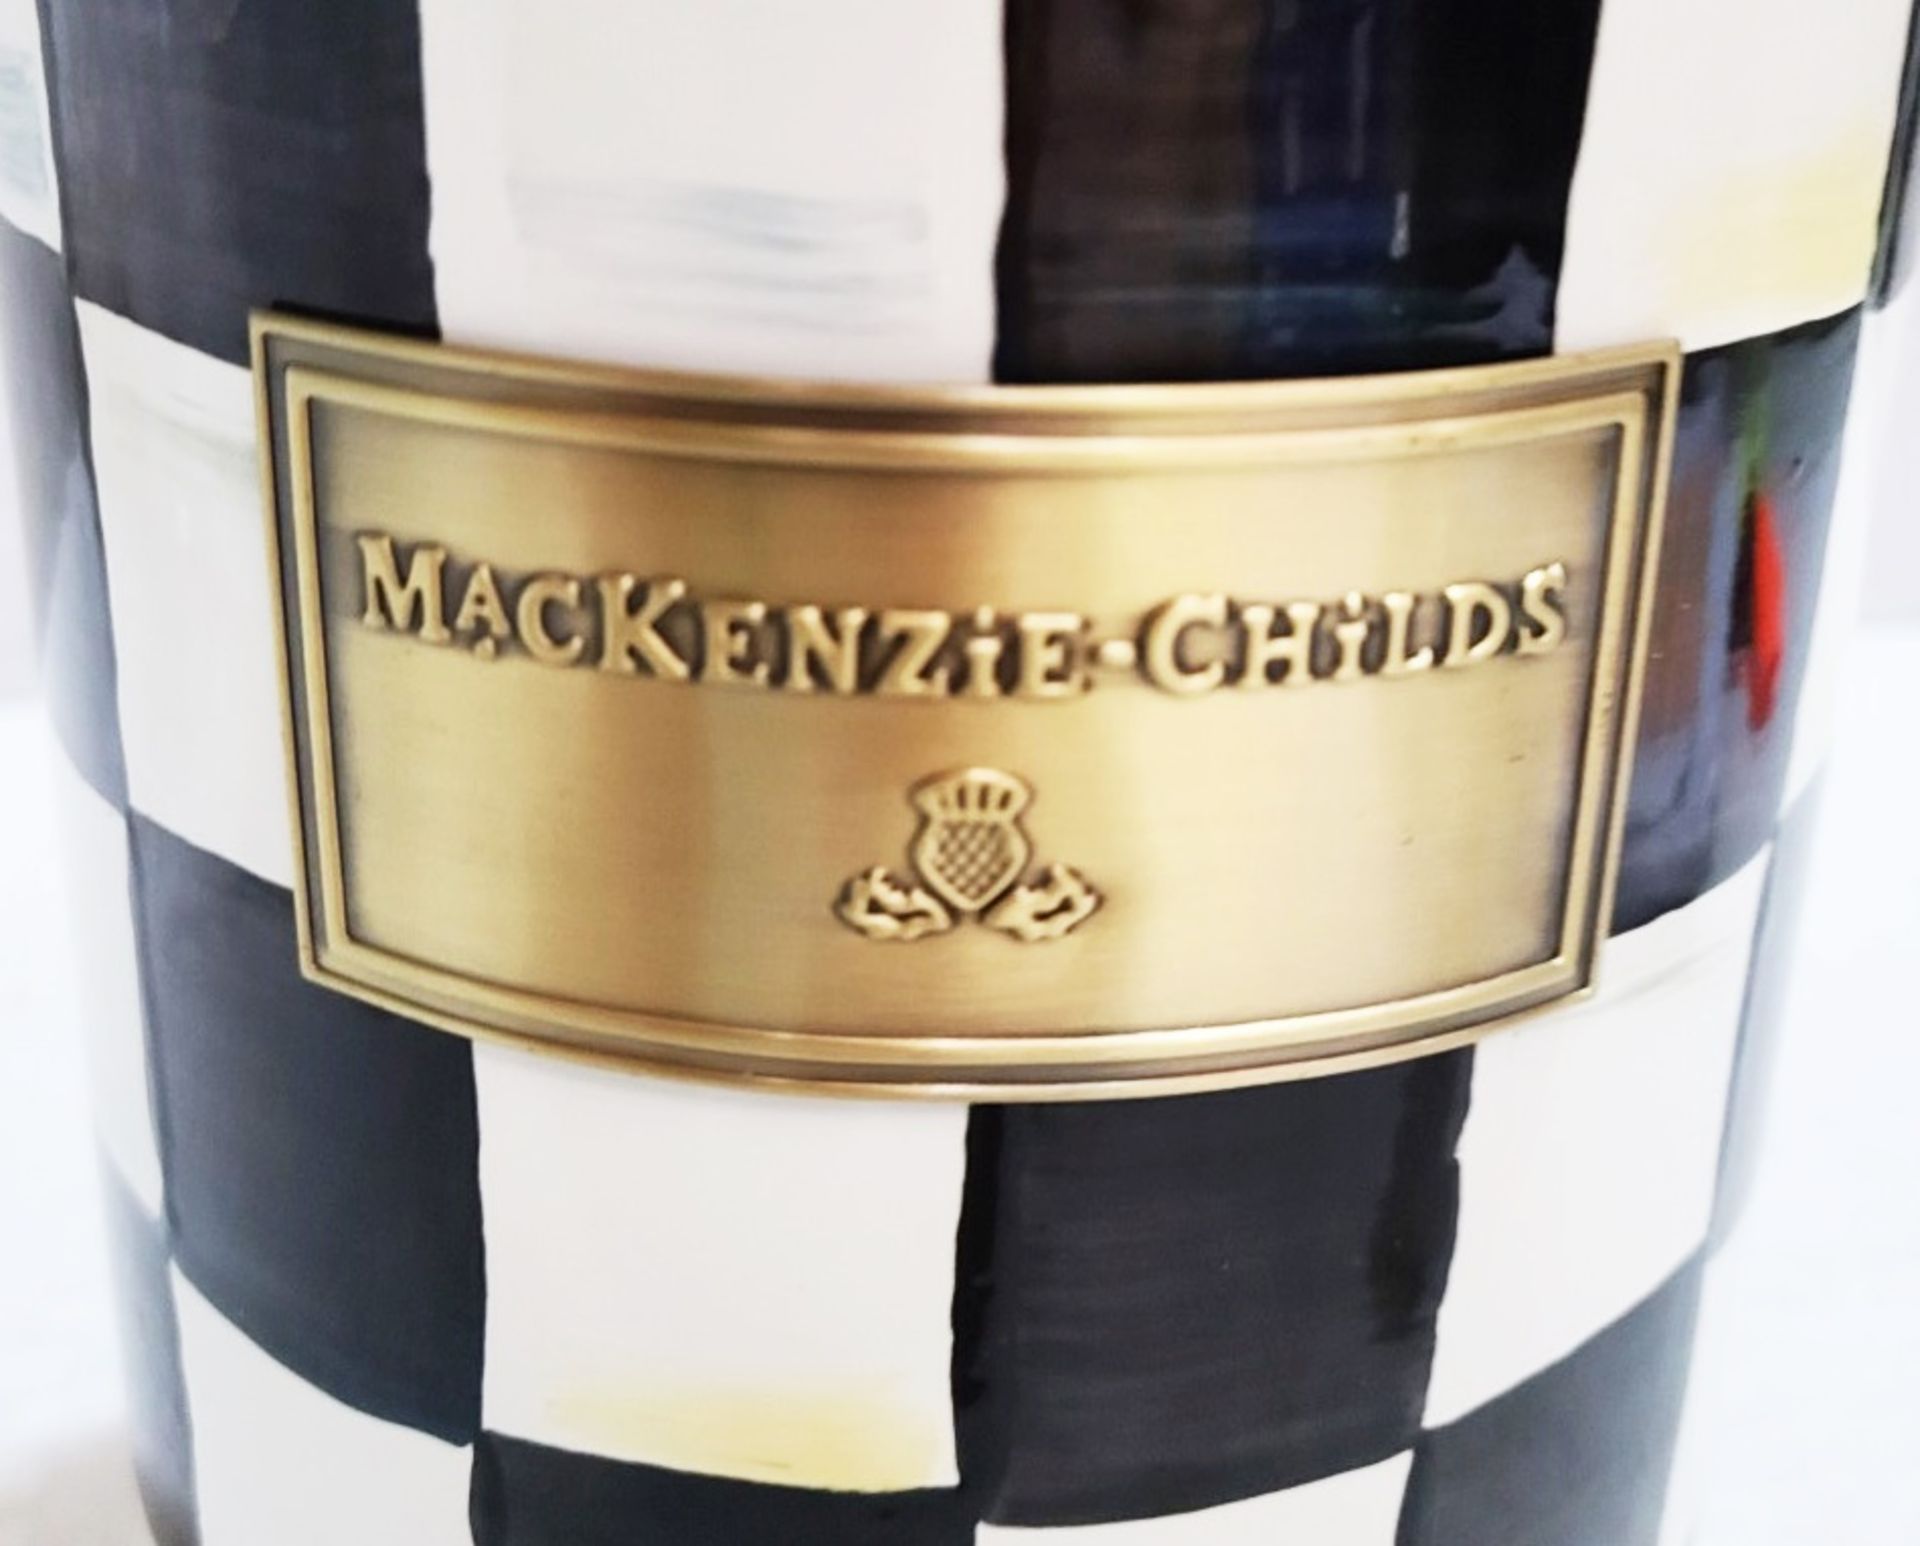 1 x MACKENZIE CHILDS Large Courtly Check Enamel Canister - Original Price £131.00 - Image 4 of 5